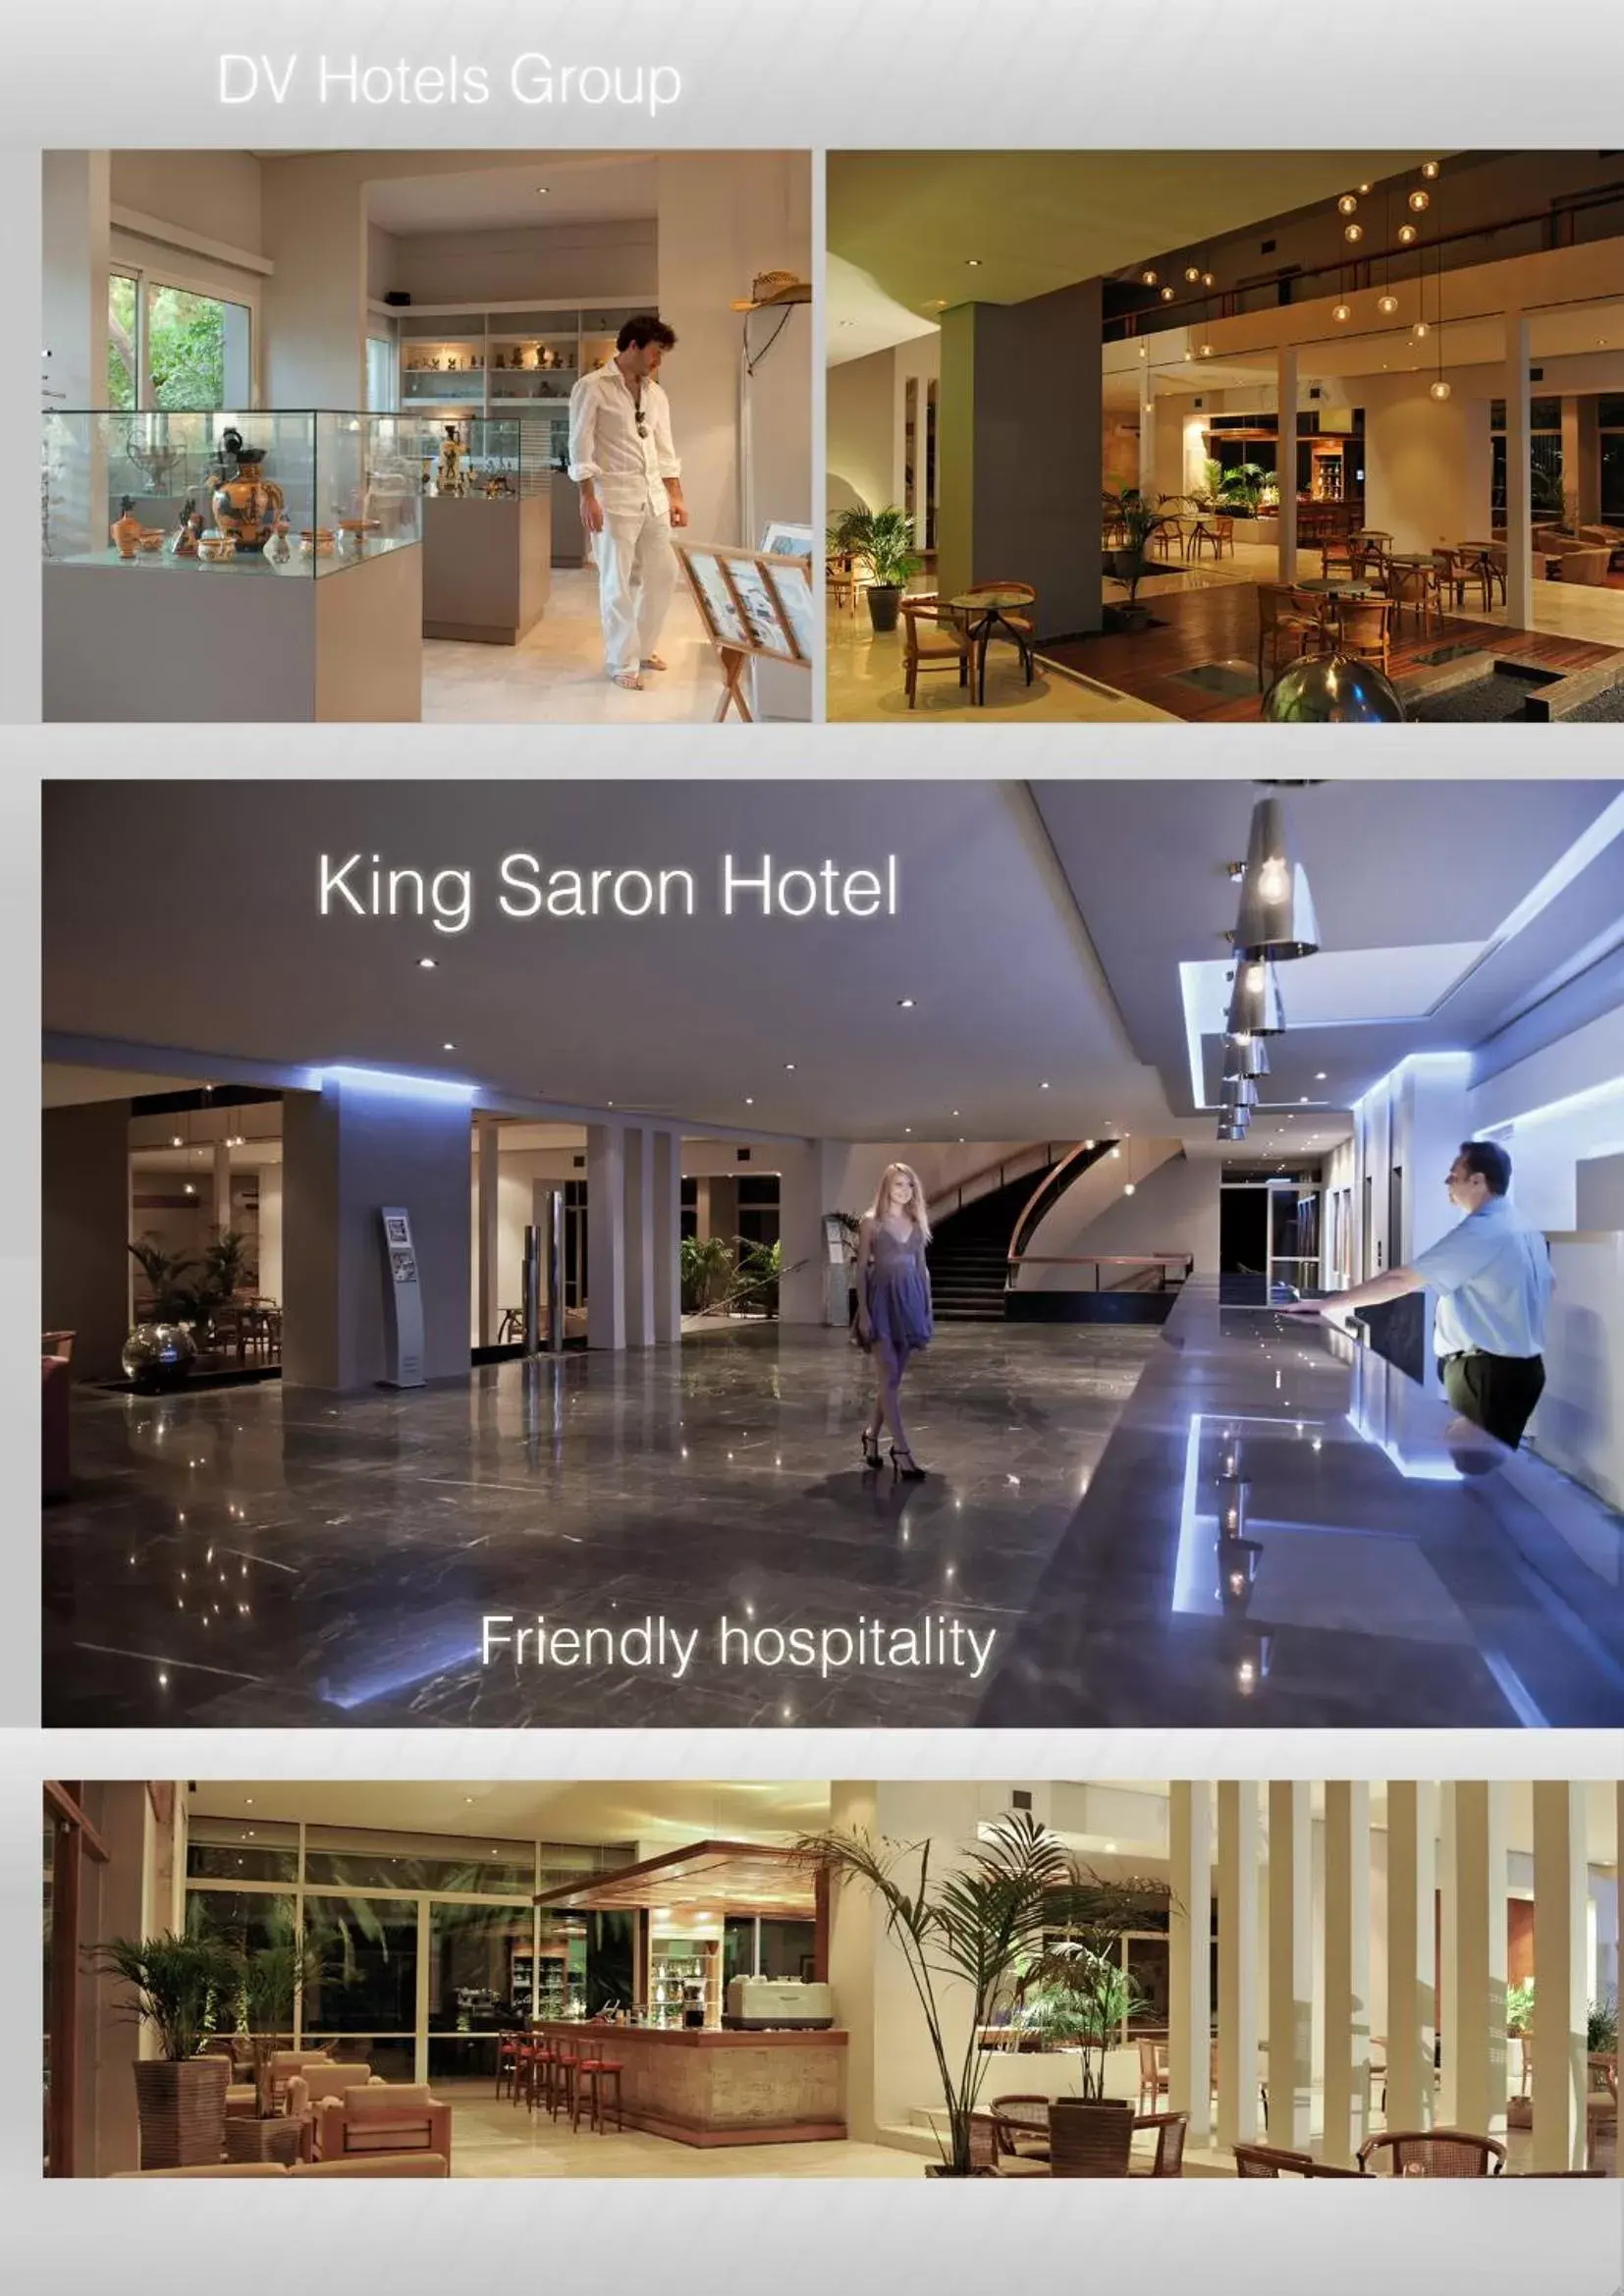 Area and facilities in Hotel King Saron